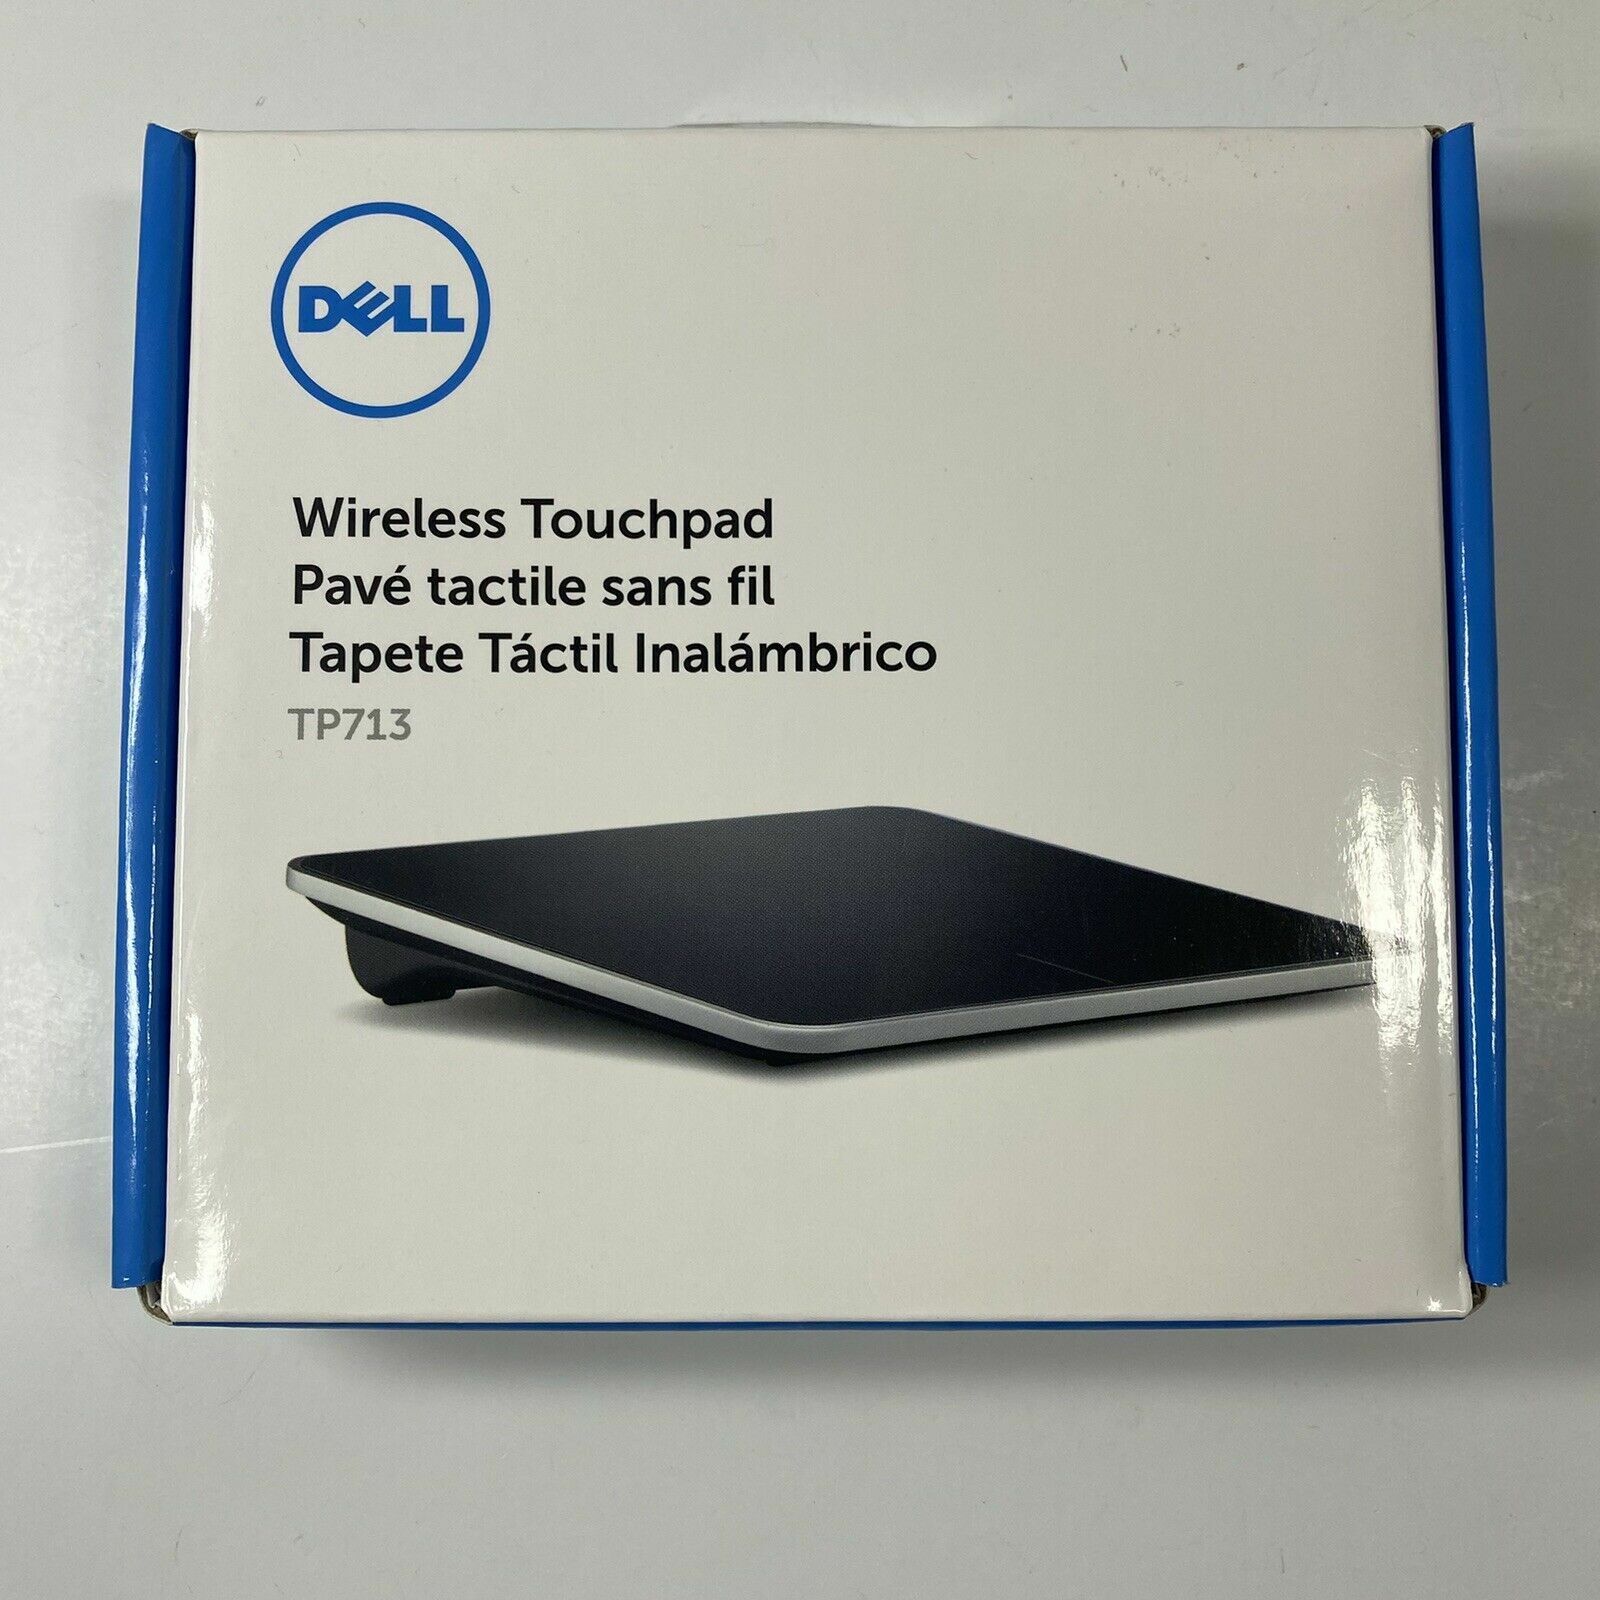 DELL WIRELESS TOUCHPAD TP713-NEW (STILL SEALED)